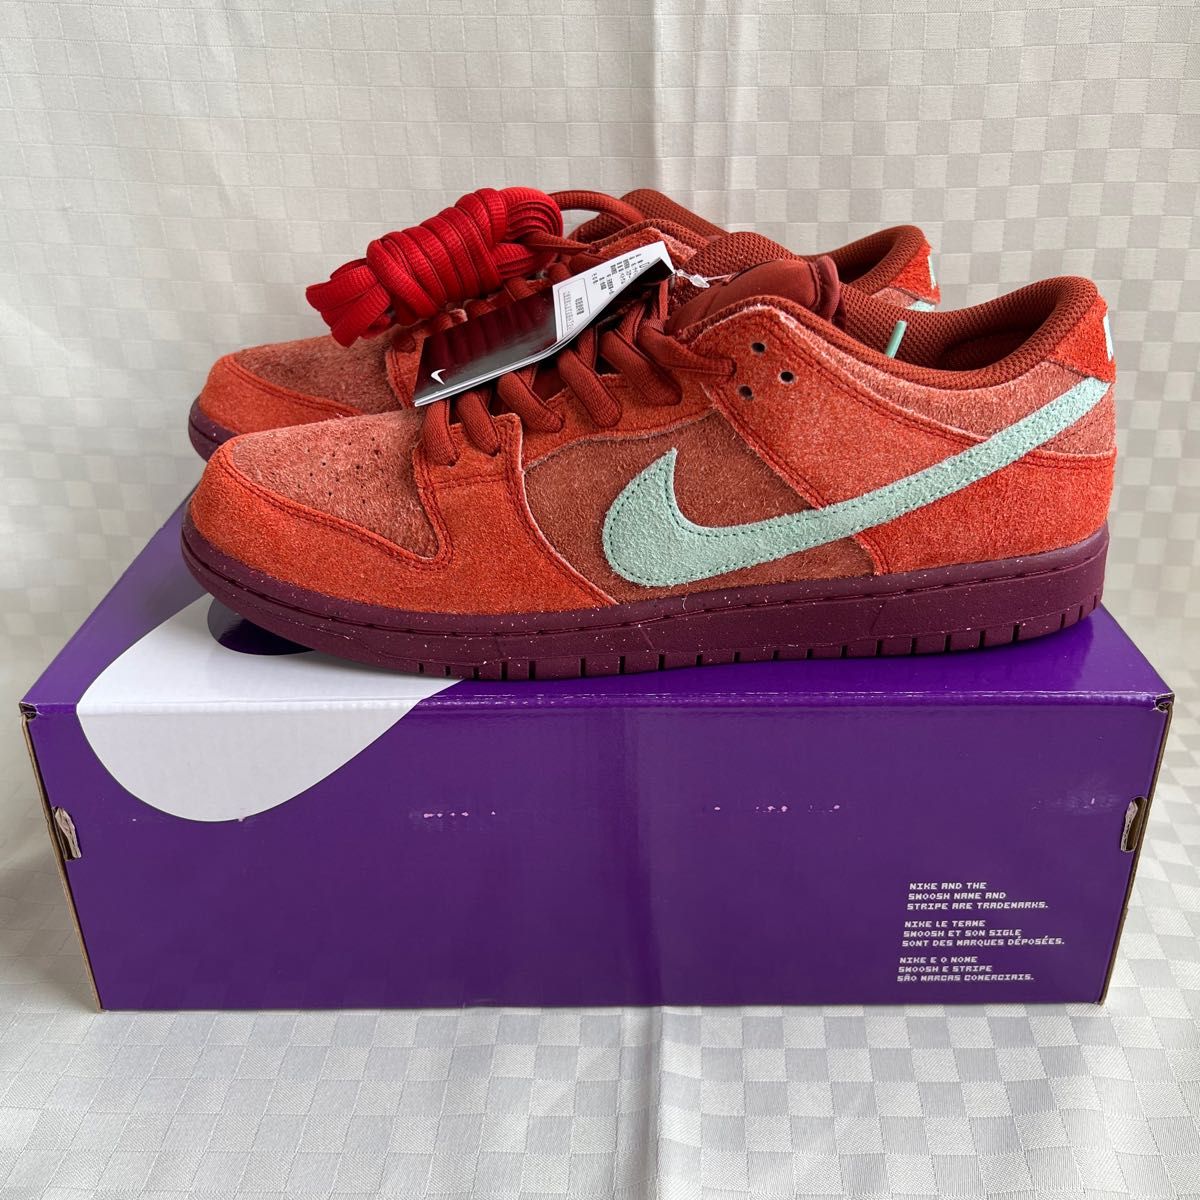 NIKE SB DUNK LOW PRO PRM MYSTIC RED AND ROSEWOOD US 5  5cm